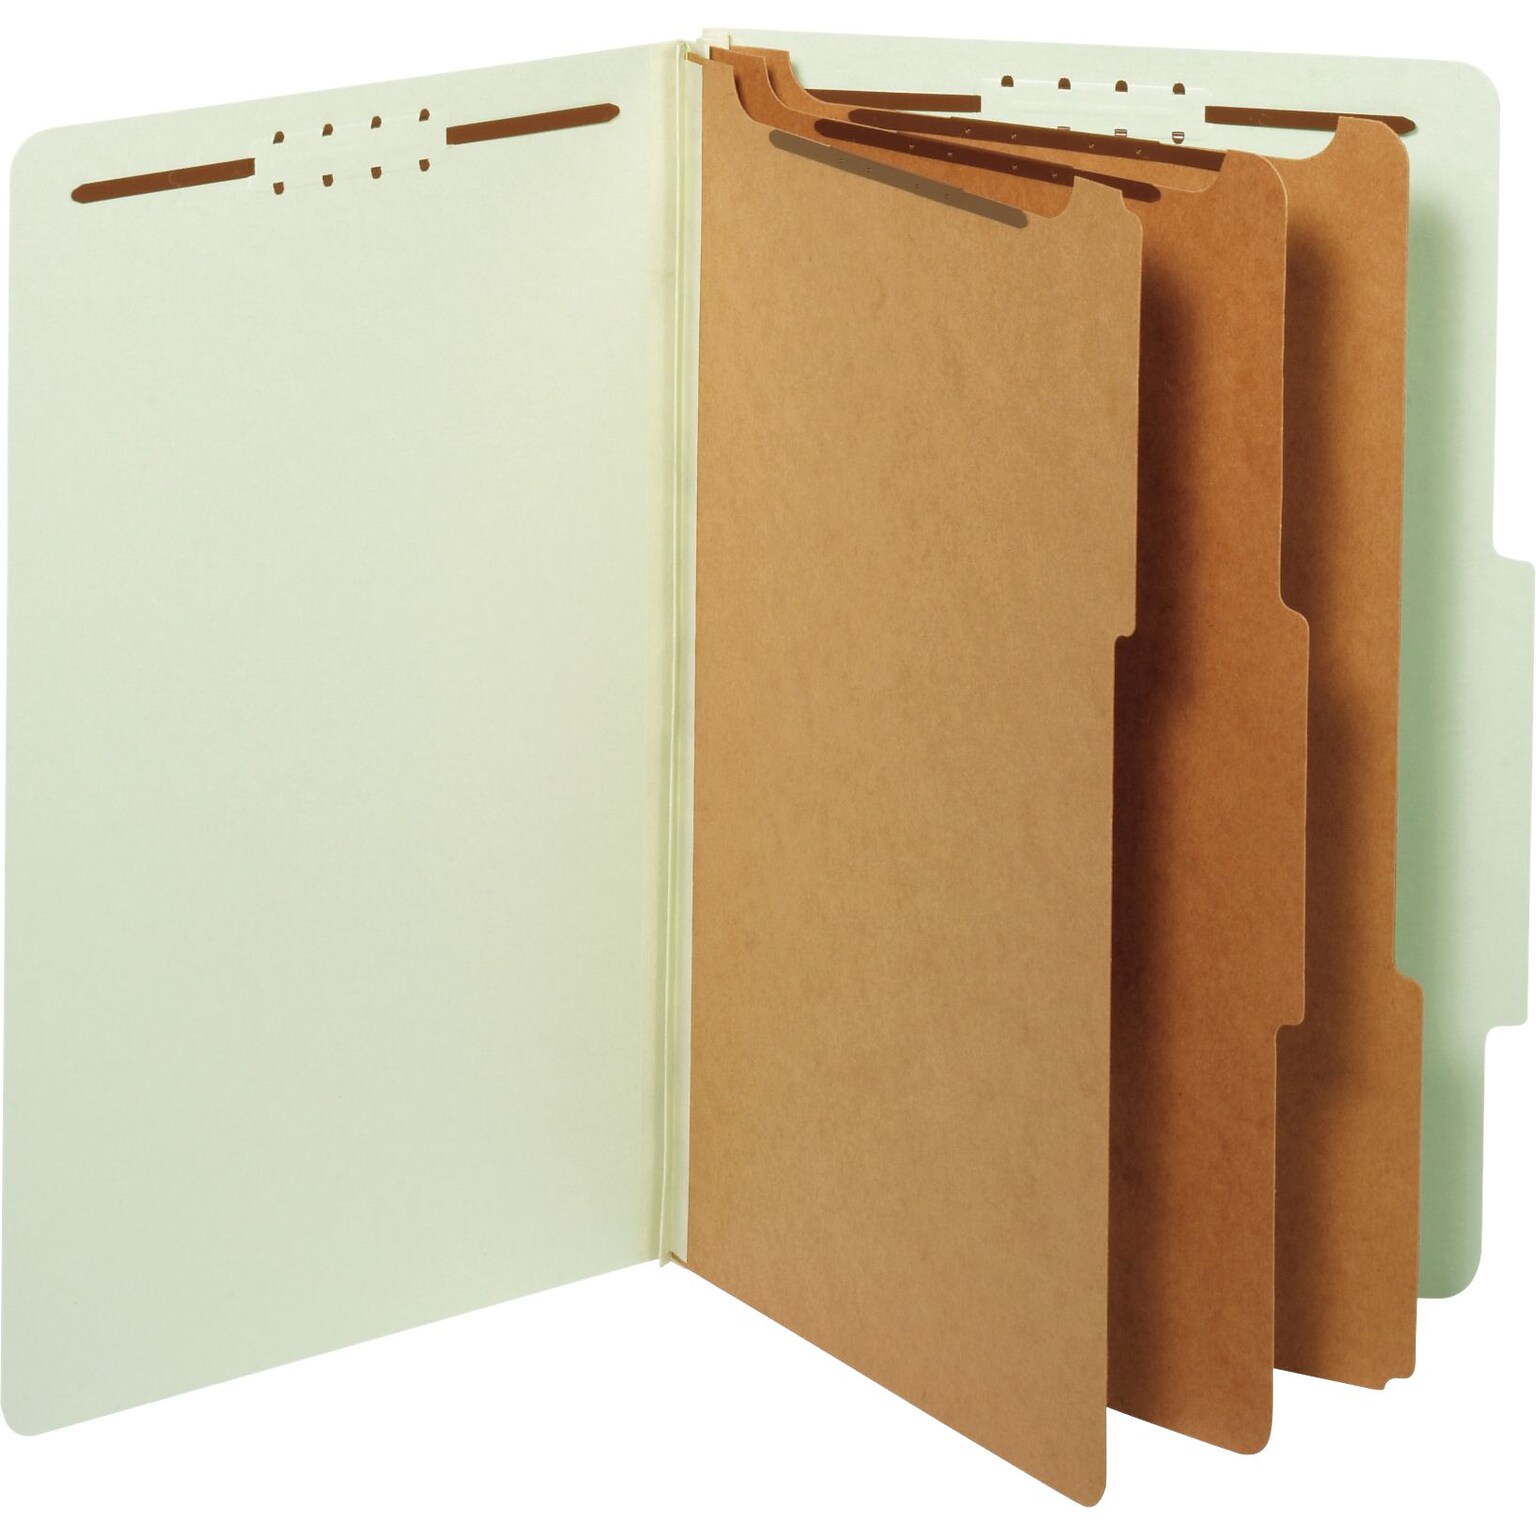 Globe-Weis Recycled Heavy Duty Classification Folder, 3-Dividers, Legal Size, Green, 10/Box (29091)